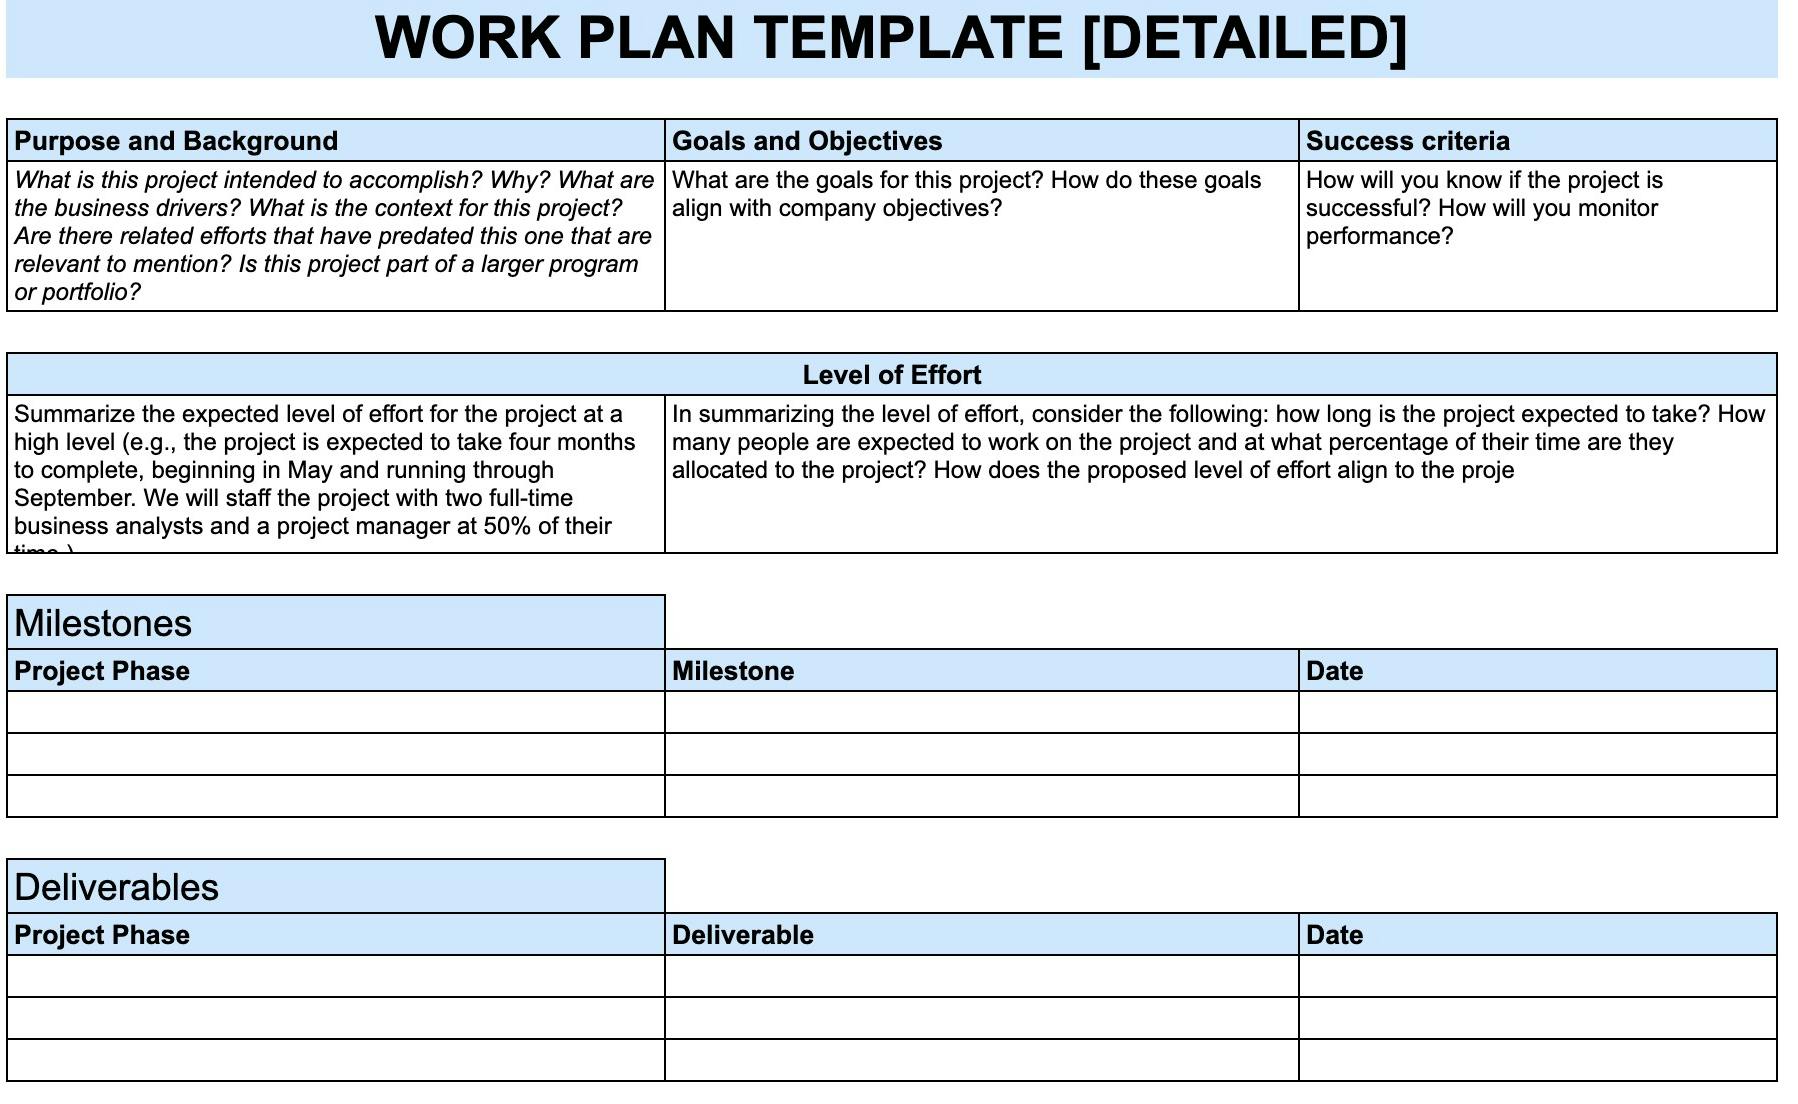 how-to-create-a-work-plan-in-5-steps-free-templates